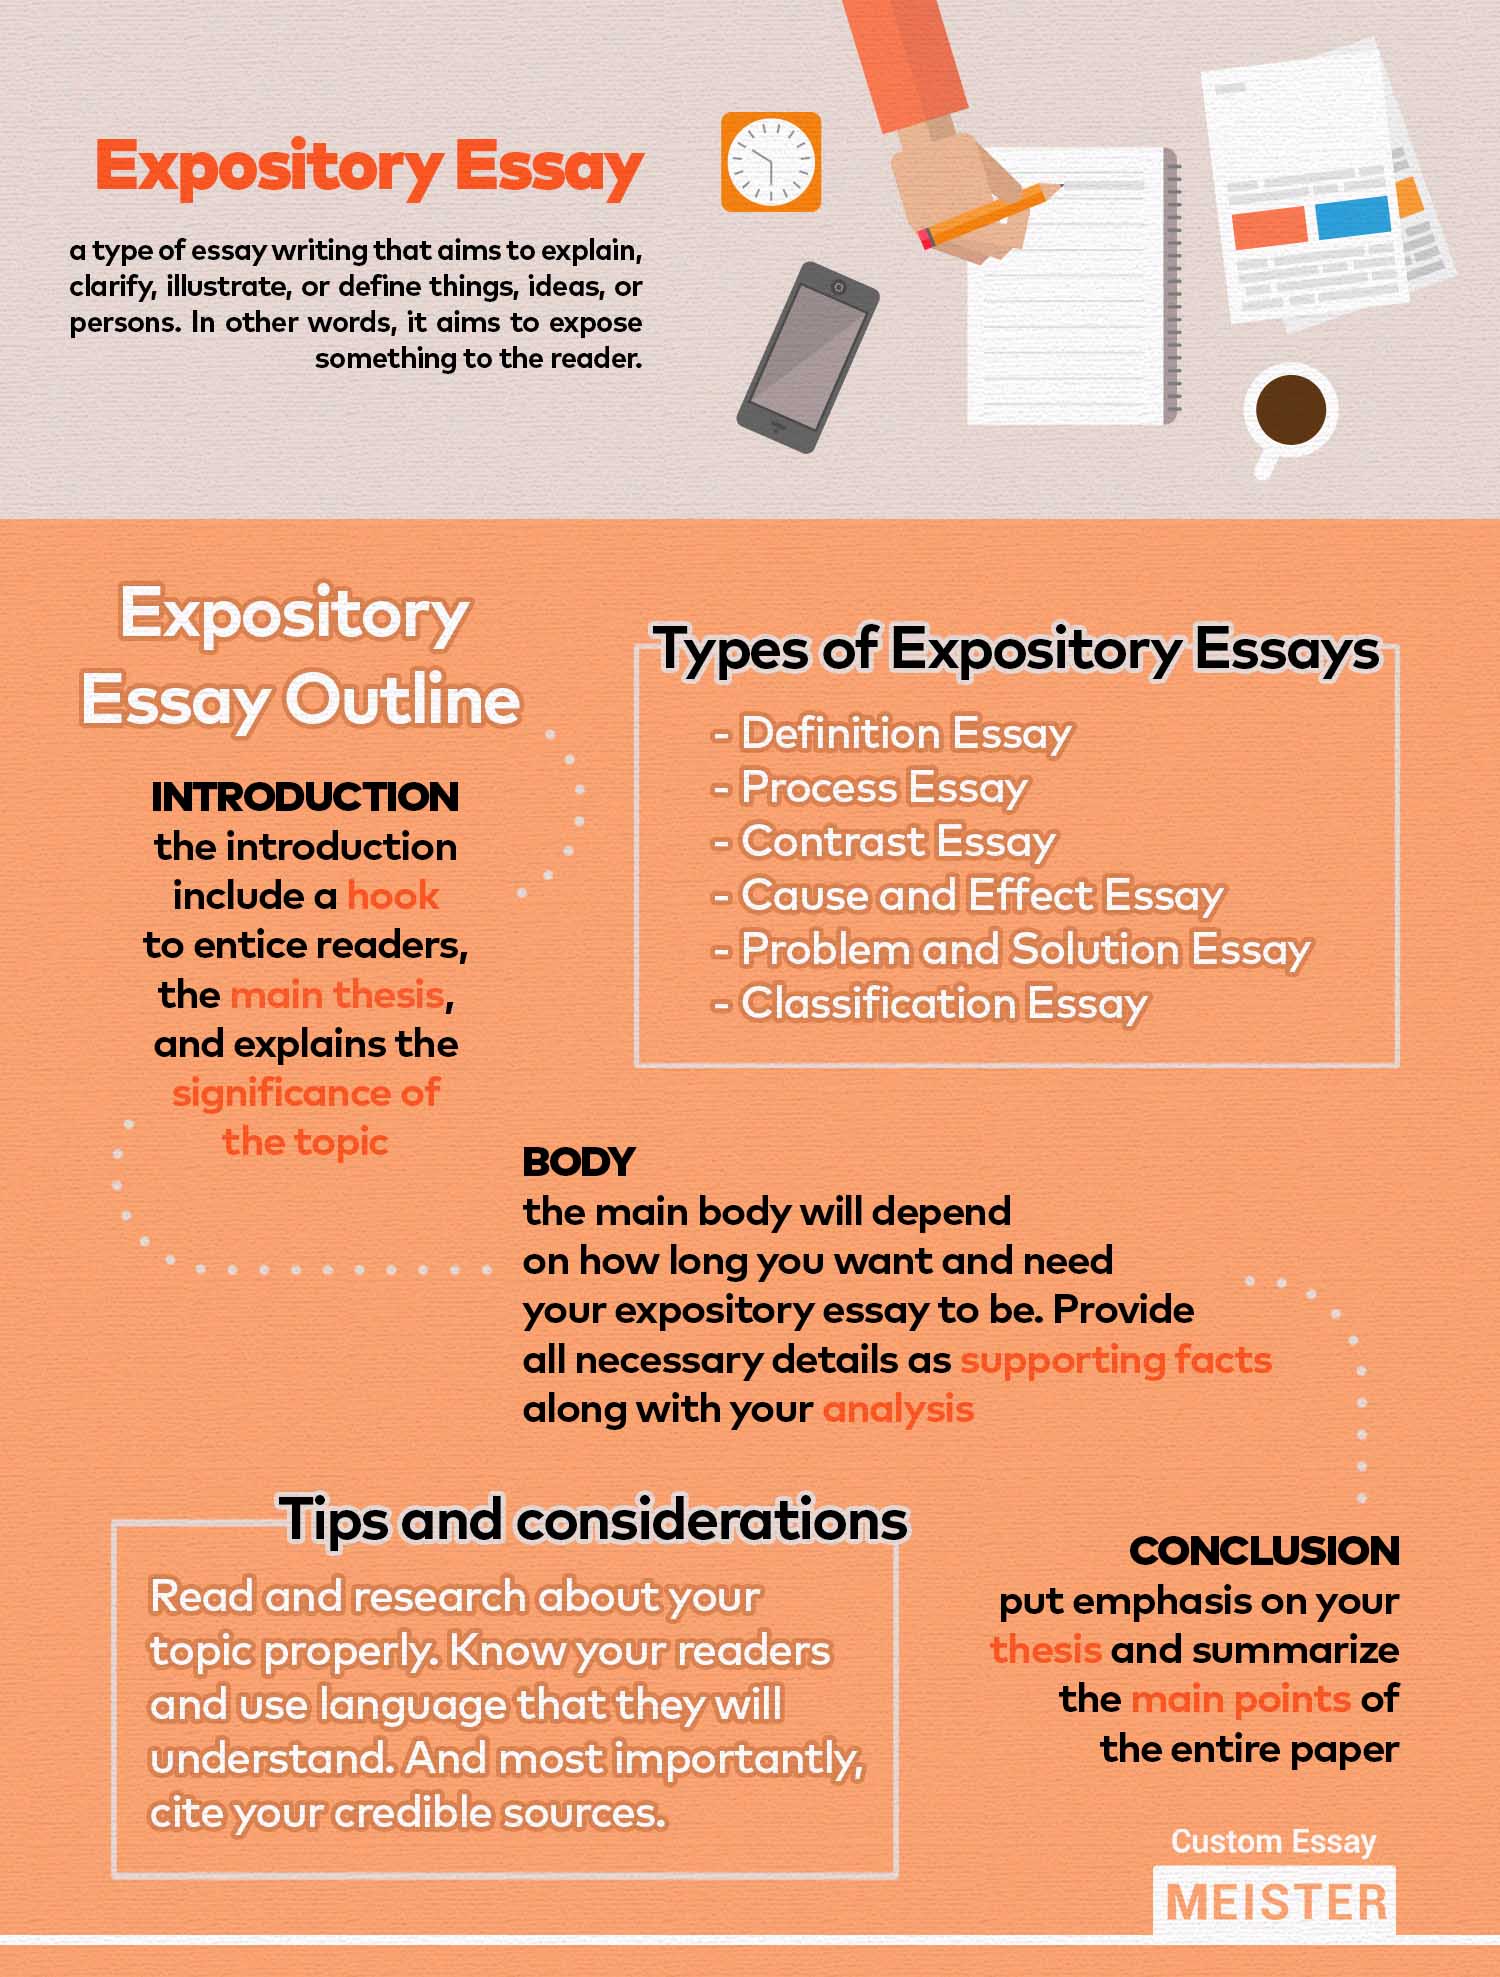 How To Write An Expository Essay in 29 Steps - CustomEssayMeister